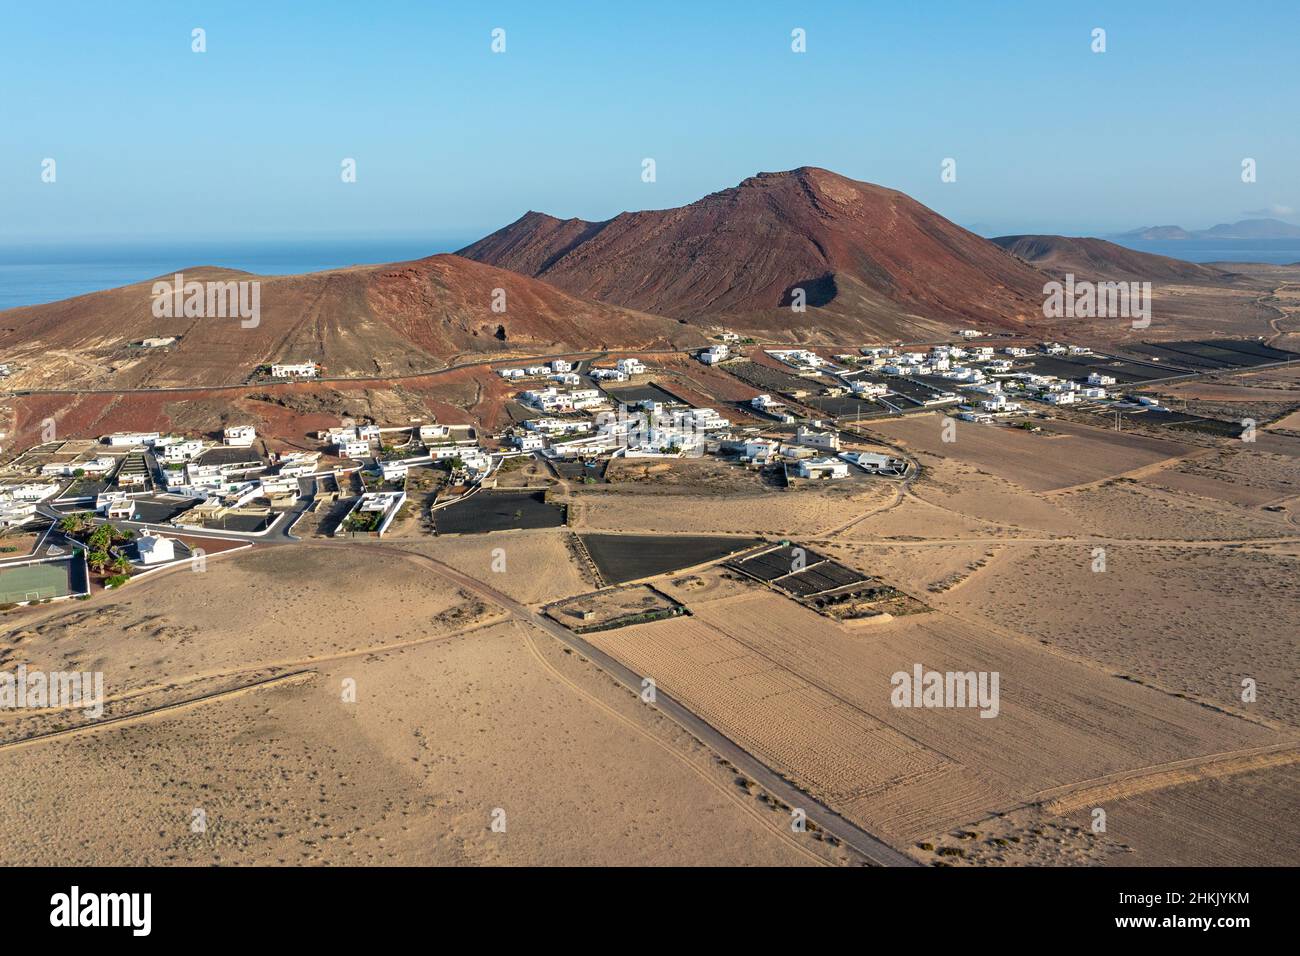 Place Soo at the foot of the Pico Colorado and the Caldera Trasera, Canary Islands, Lanzarote Stock Photo